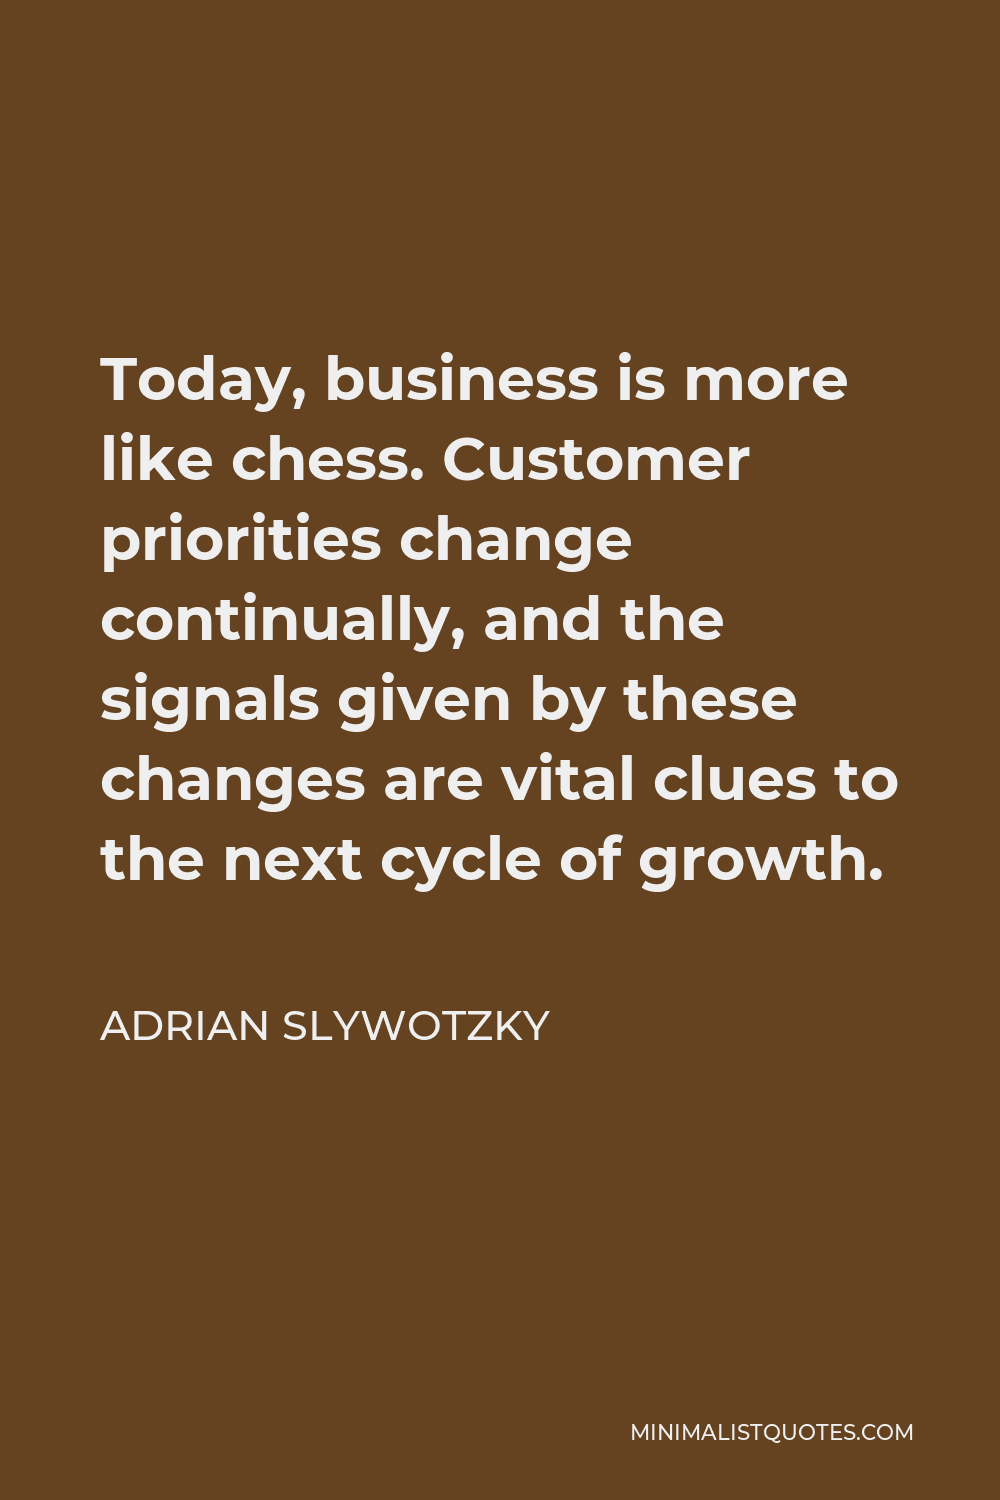 Adrian Slywotzky Quote - Today, business is more like chess. Customer priorities change continually, and the signals given by these changes are vital clues to the next cycle of growth.